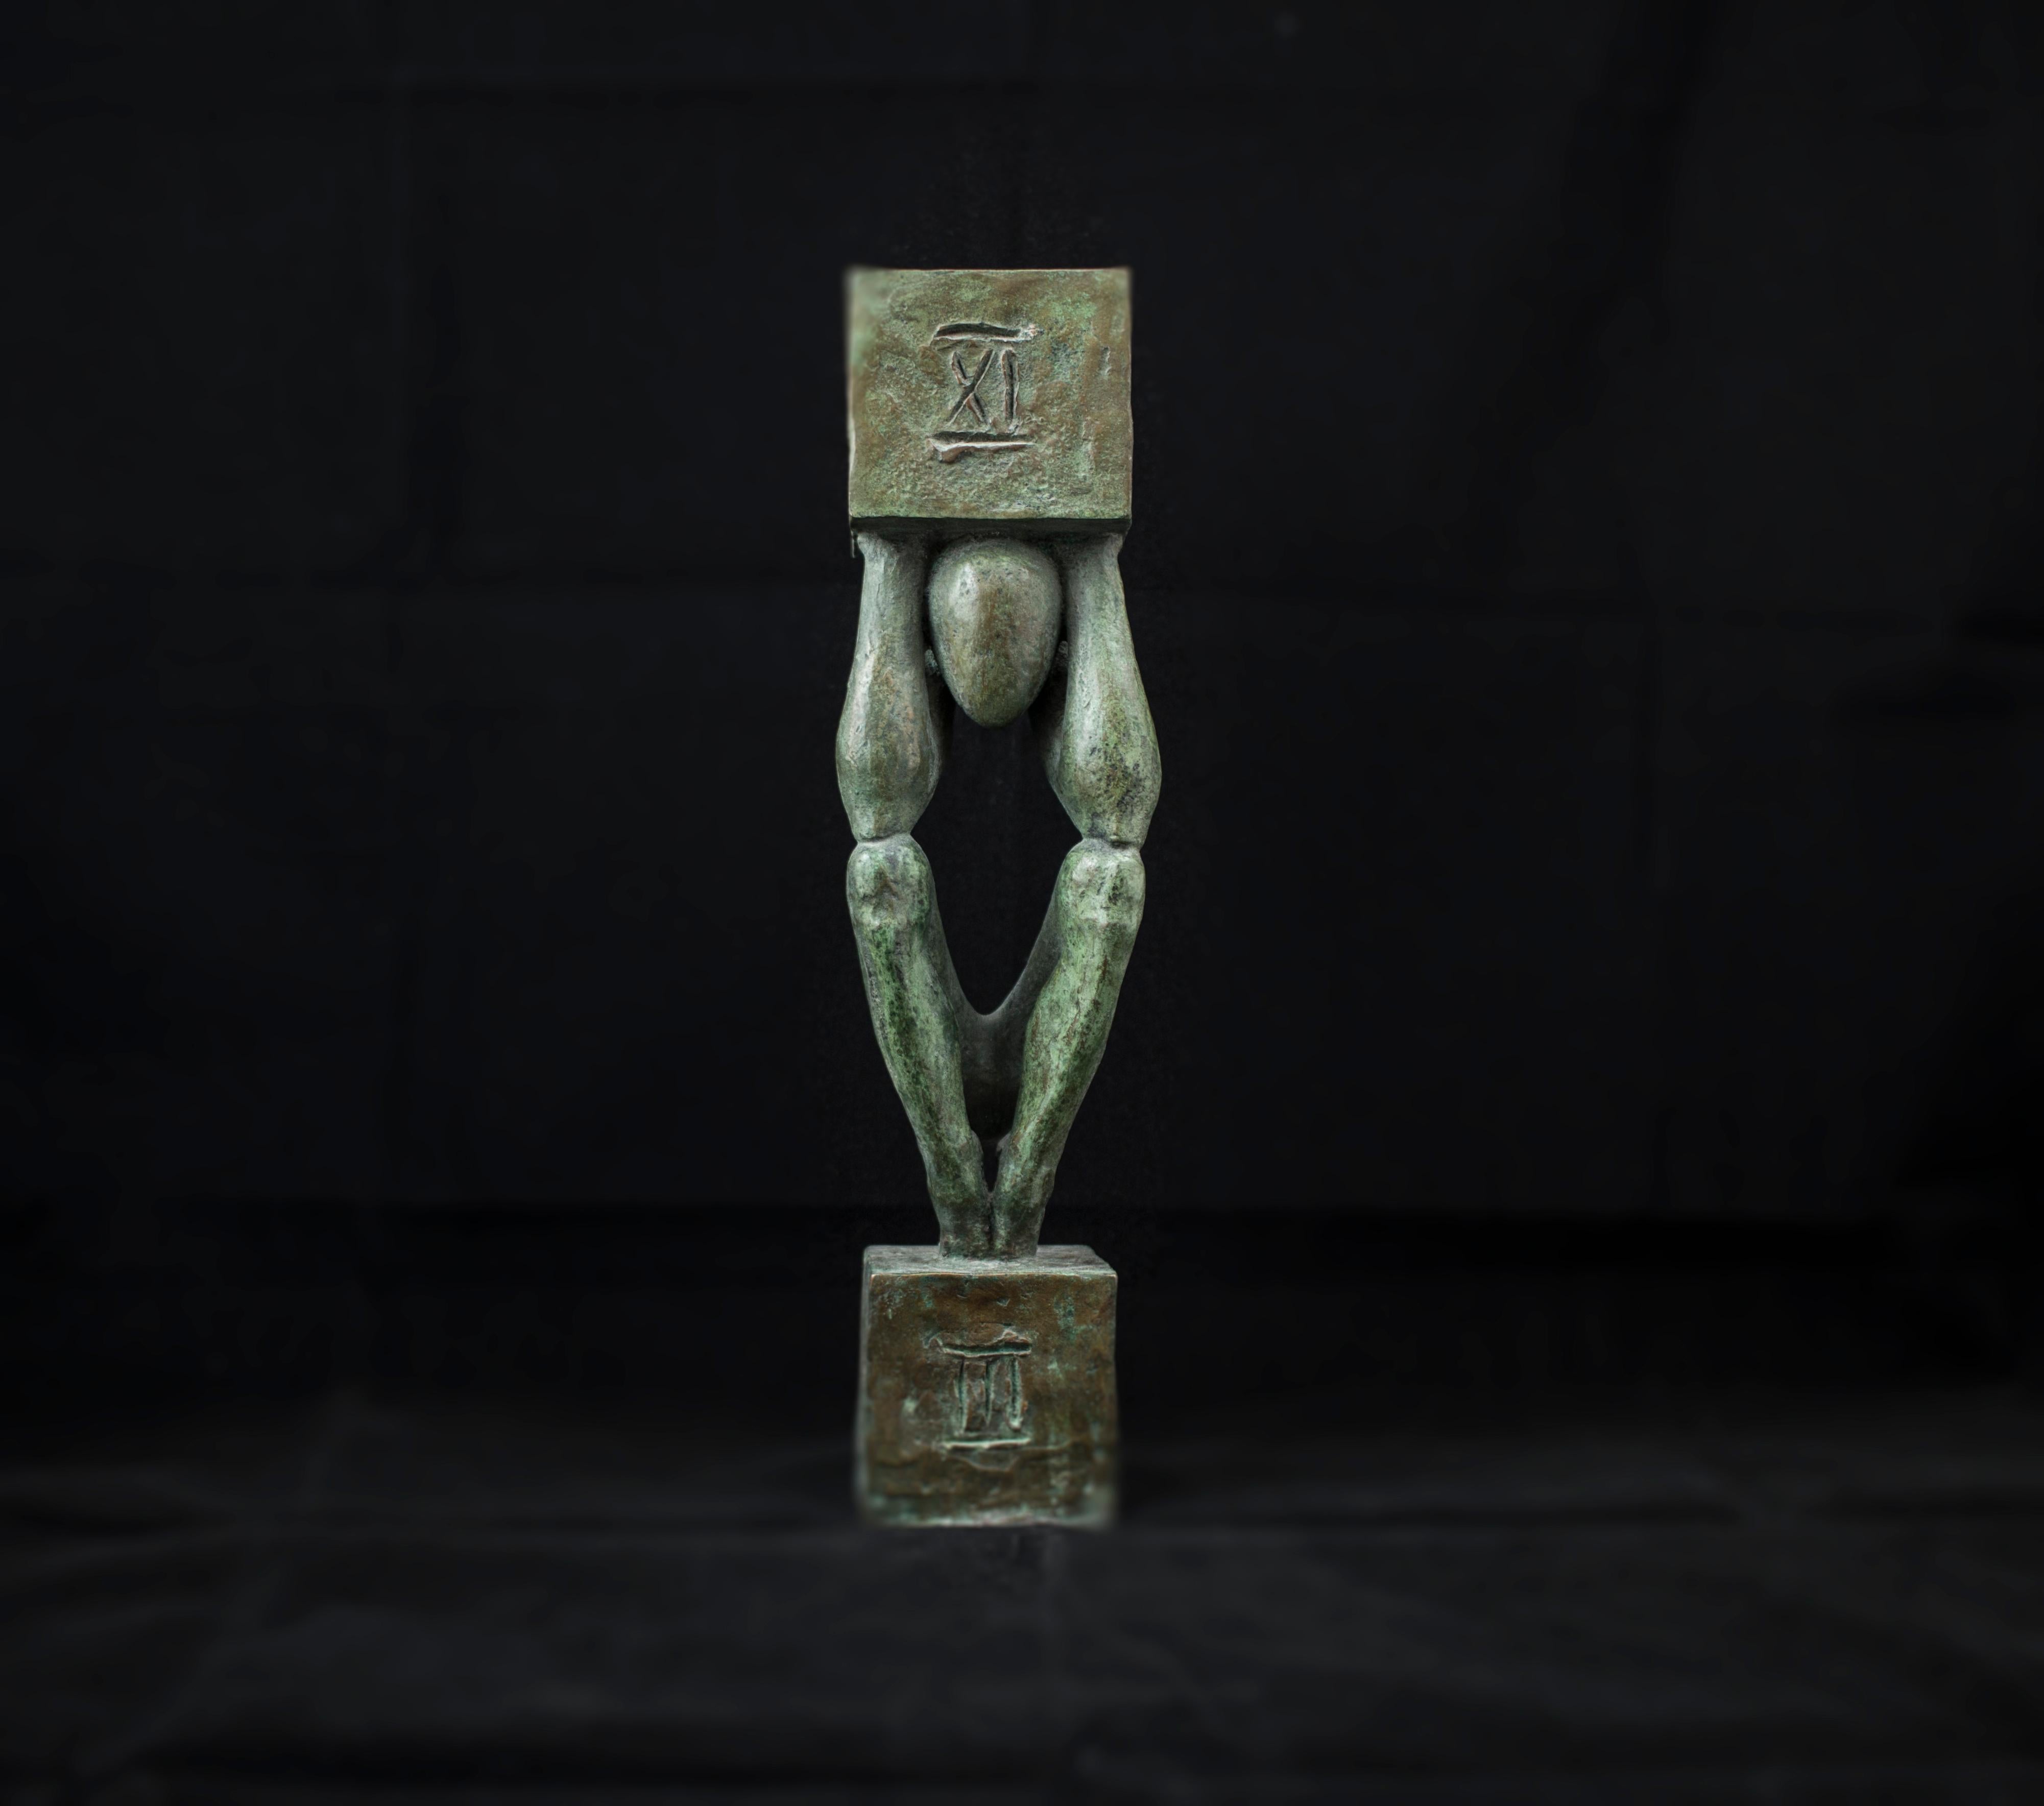 Atlas №2 Bronze sculpture Edition of 5 by Sergii Shaulis 
2018
From the Atlas series
Bronze
Approximate weight 11lbs 

Color - as shown on main picture 

ABOUT ARTIST 
Born on 27 May 1985 in Kharkiv, Ukraine. From 2005 to 2011 studied at the Kharkiv